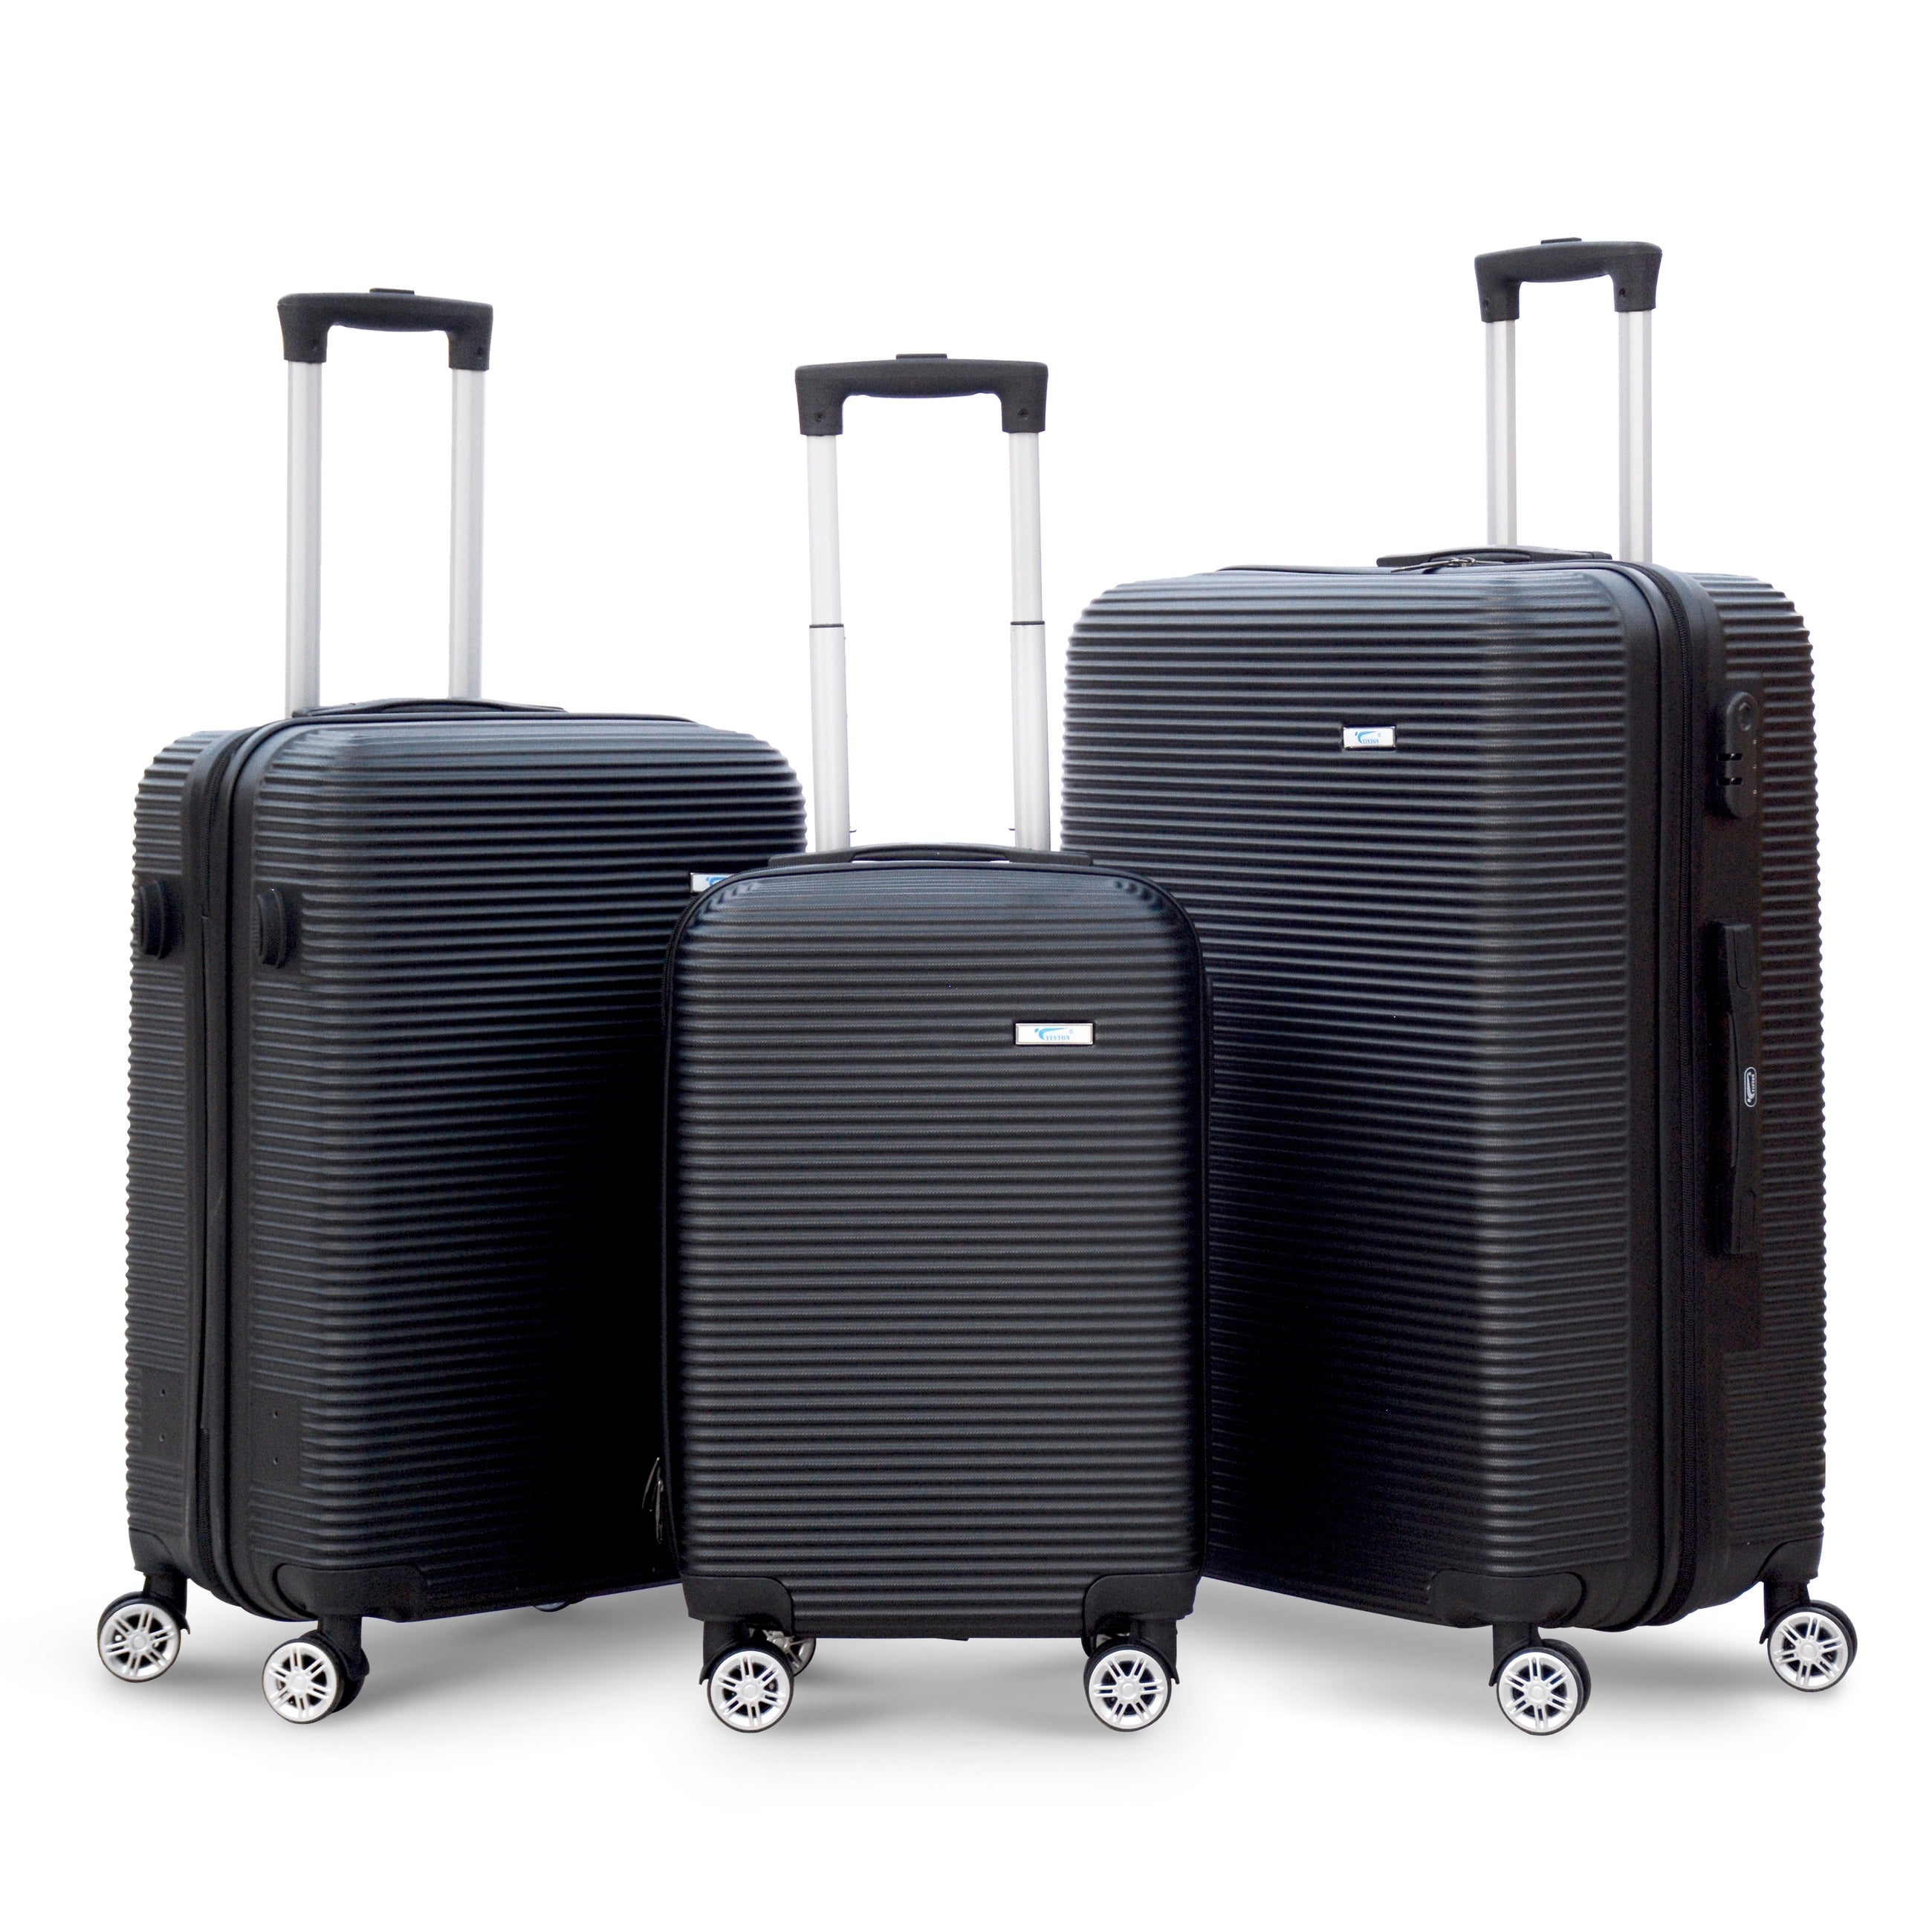 3 Piece Set 20" 24" 28 Inches Black Colour JIAN ABS Line Luggage lightweight Hard Case Trolley Bag With Spinner Wheel